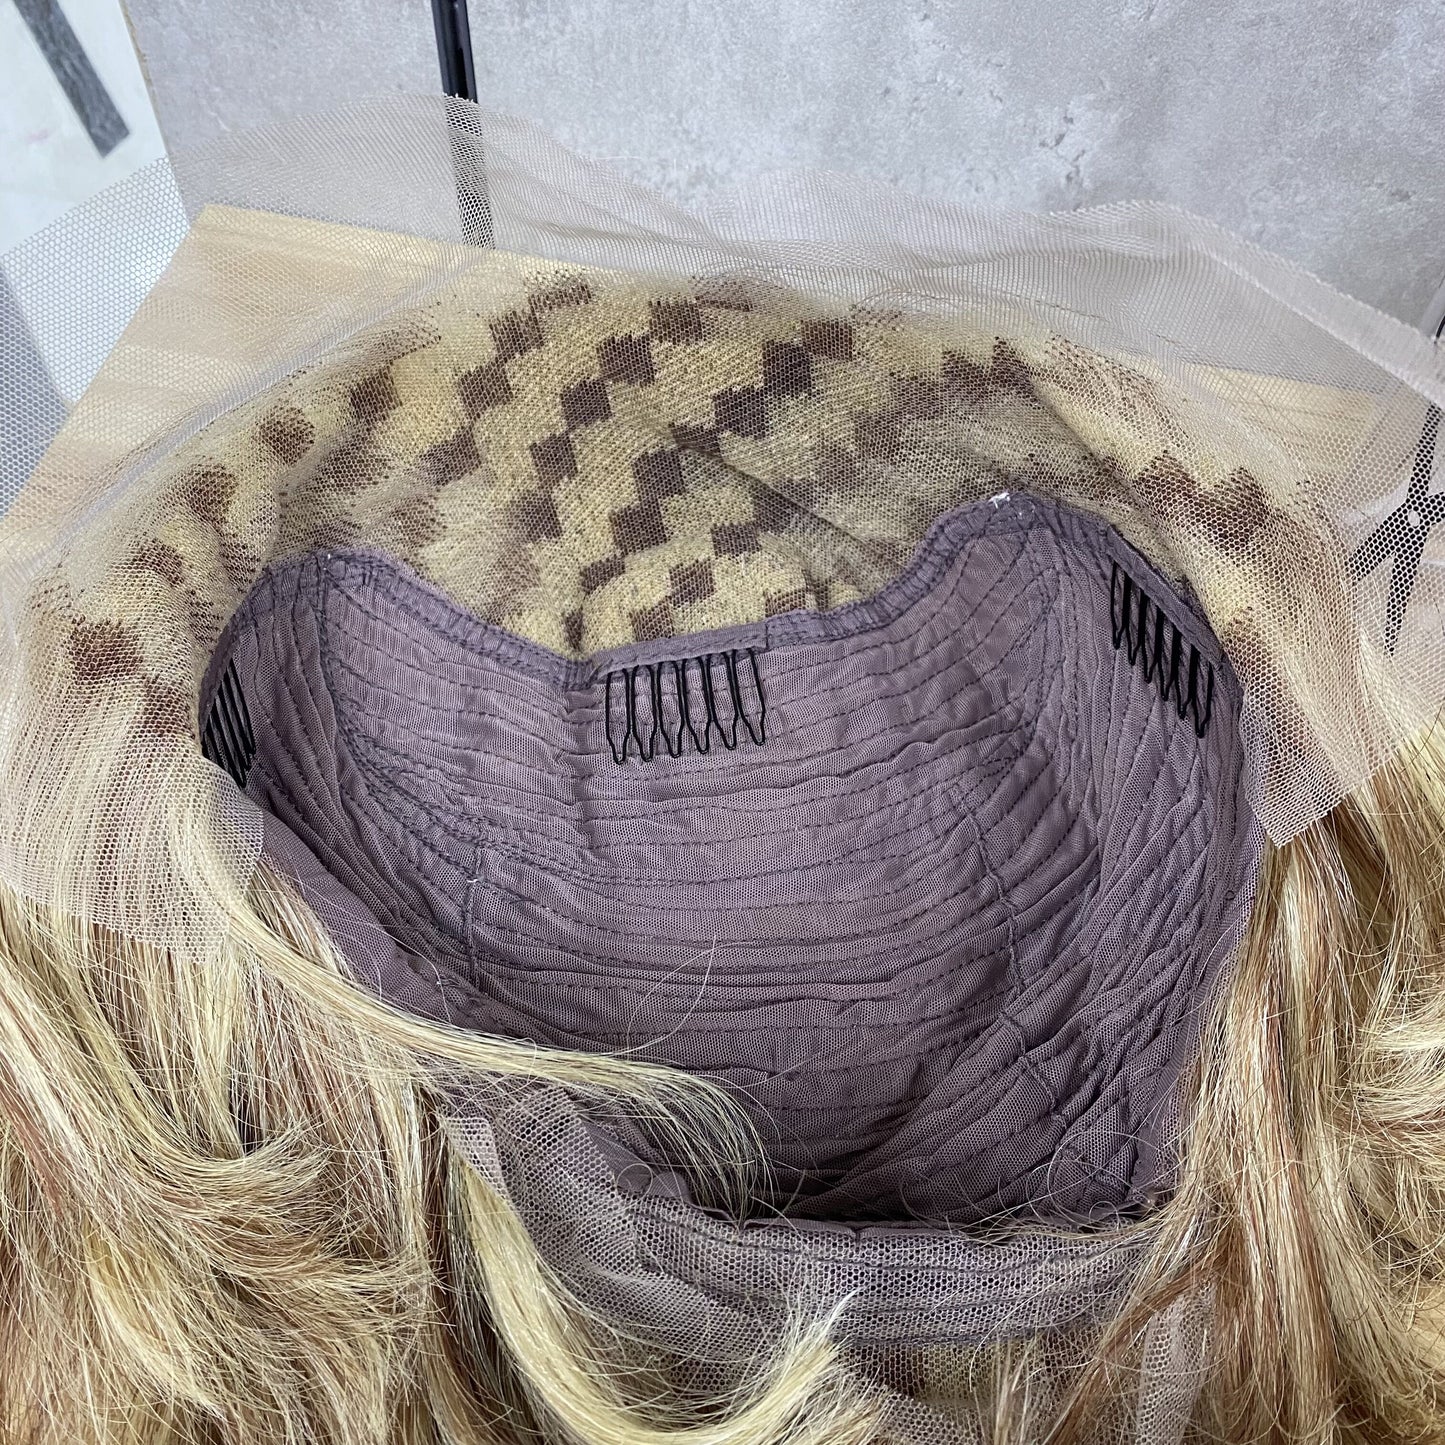 Special Color 13x4 Lace Remy Human Hair Pixie Wigs